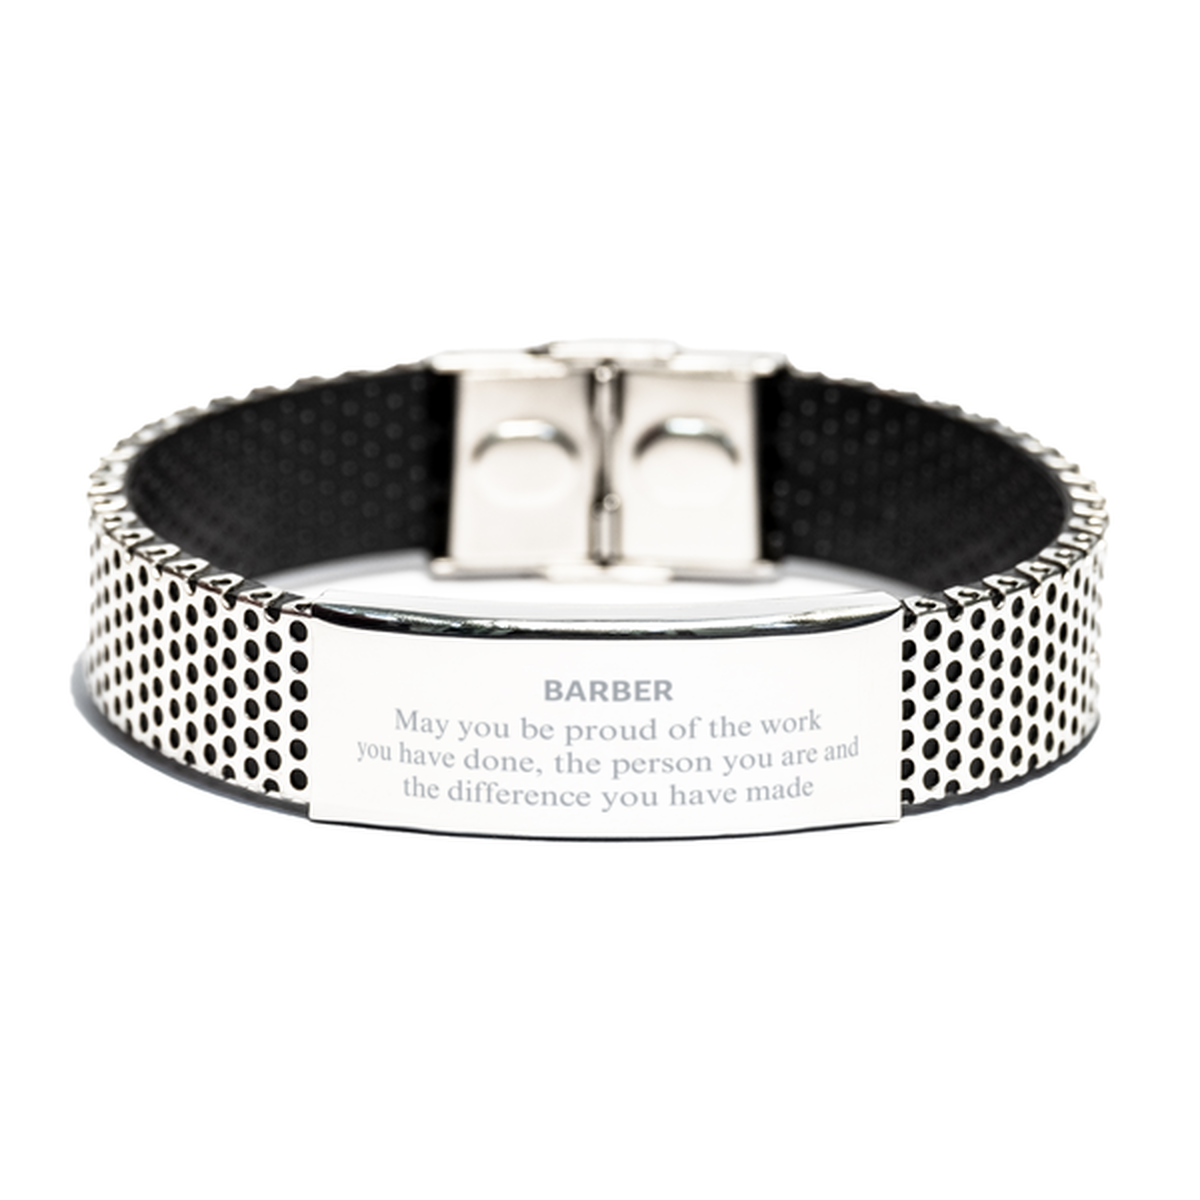 Barber May you be proud of the work you have done, Retirement Barber Stainless Steel Bracelet for Colleague Appreciation Gifts Amazing for Barber